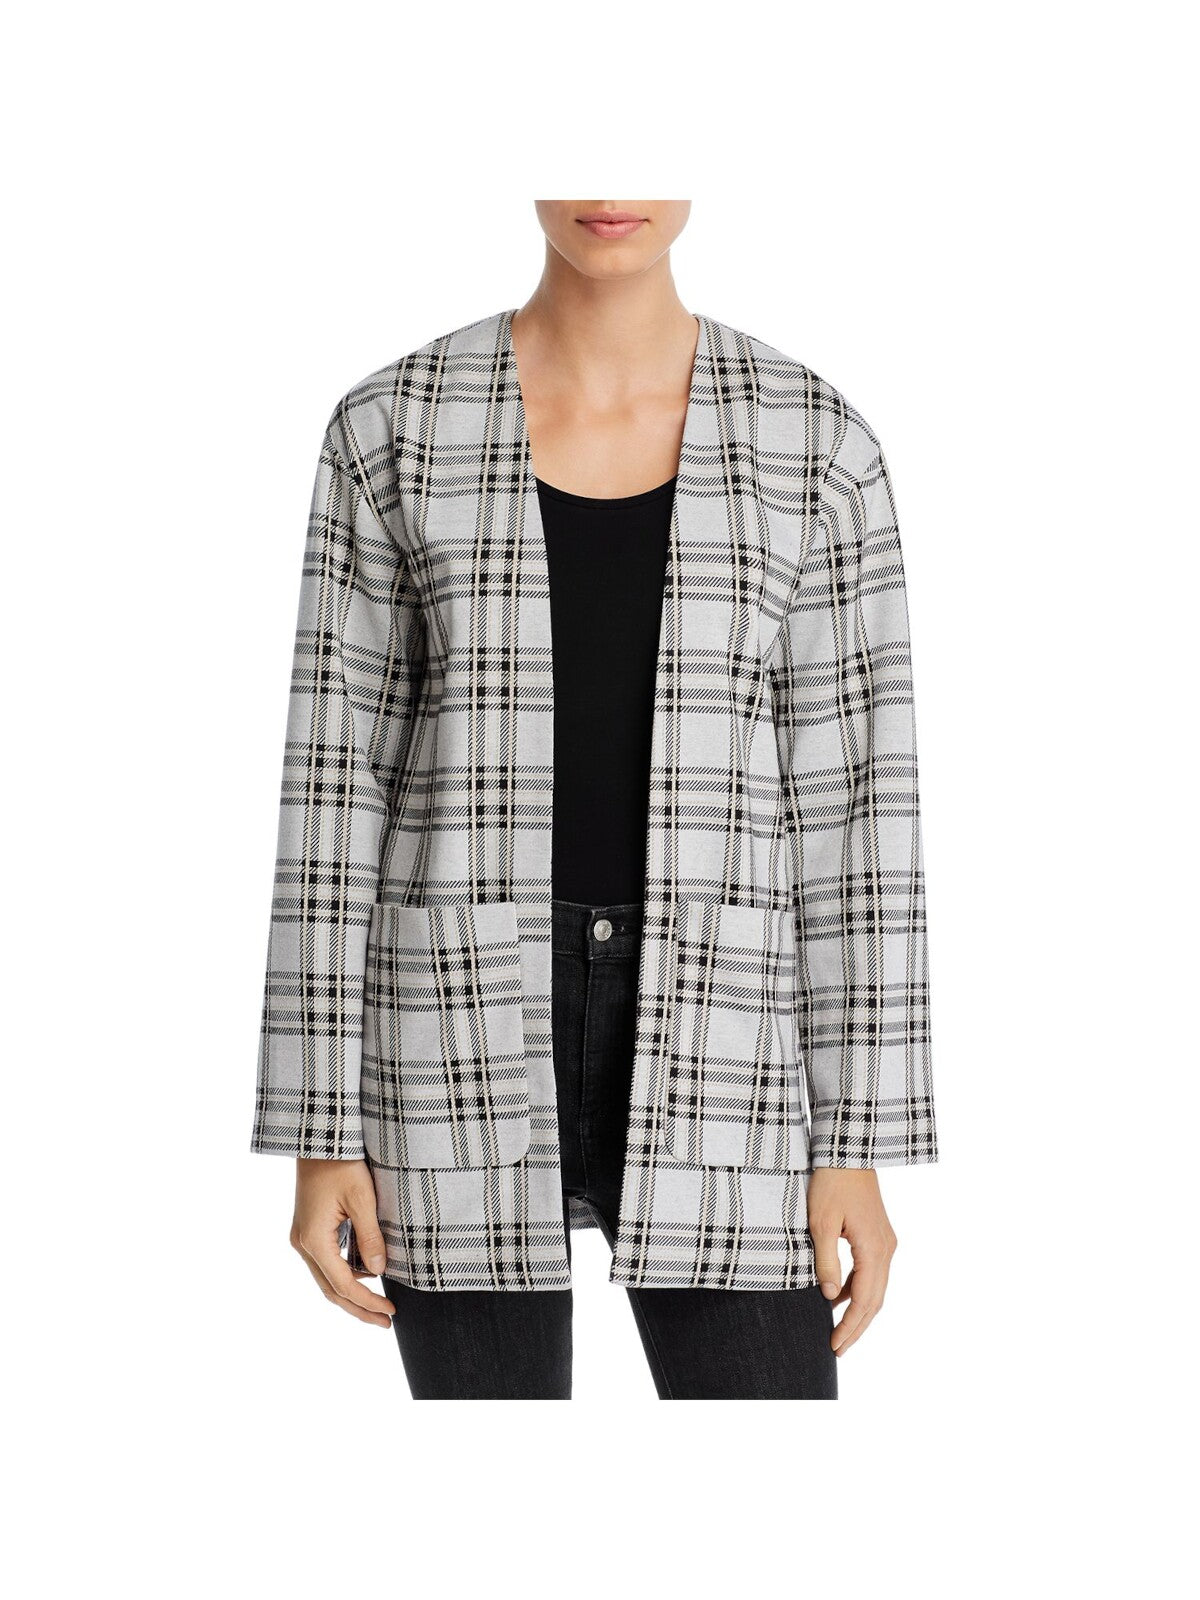 BAGATELLE Womens Gray Pocketed Open Front Cardigan Plaid Long Sleeve Wear To Work Jacket L